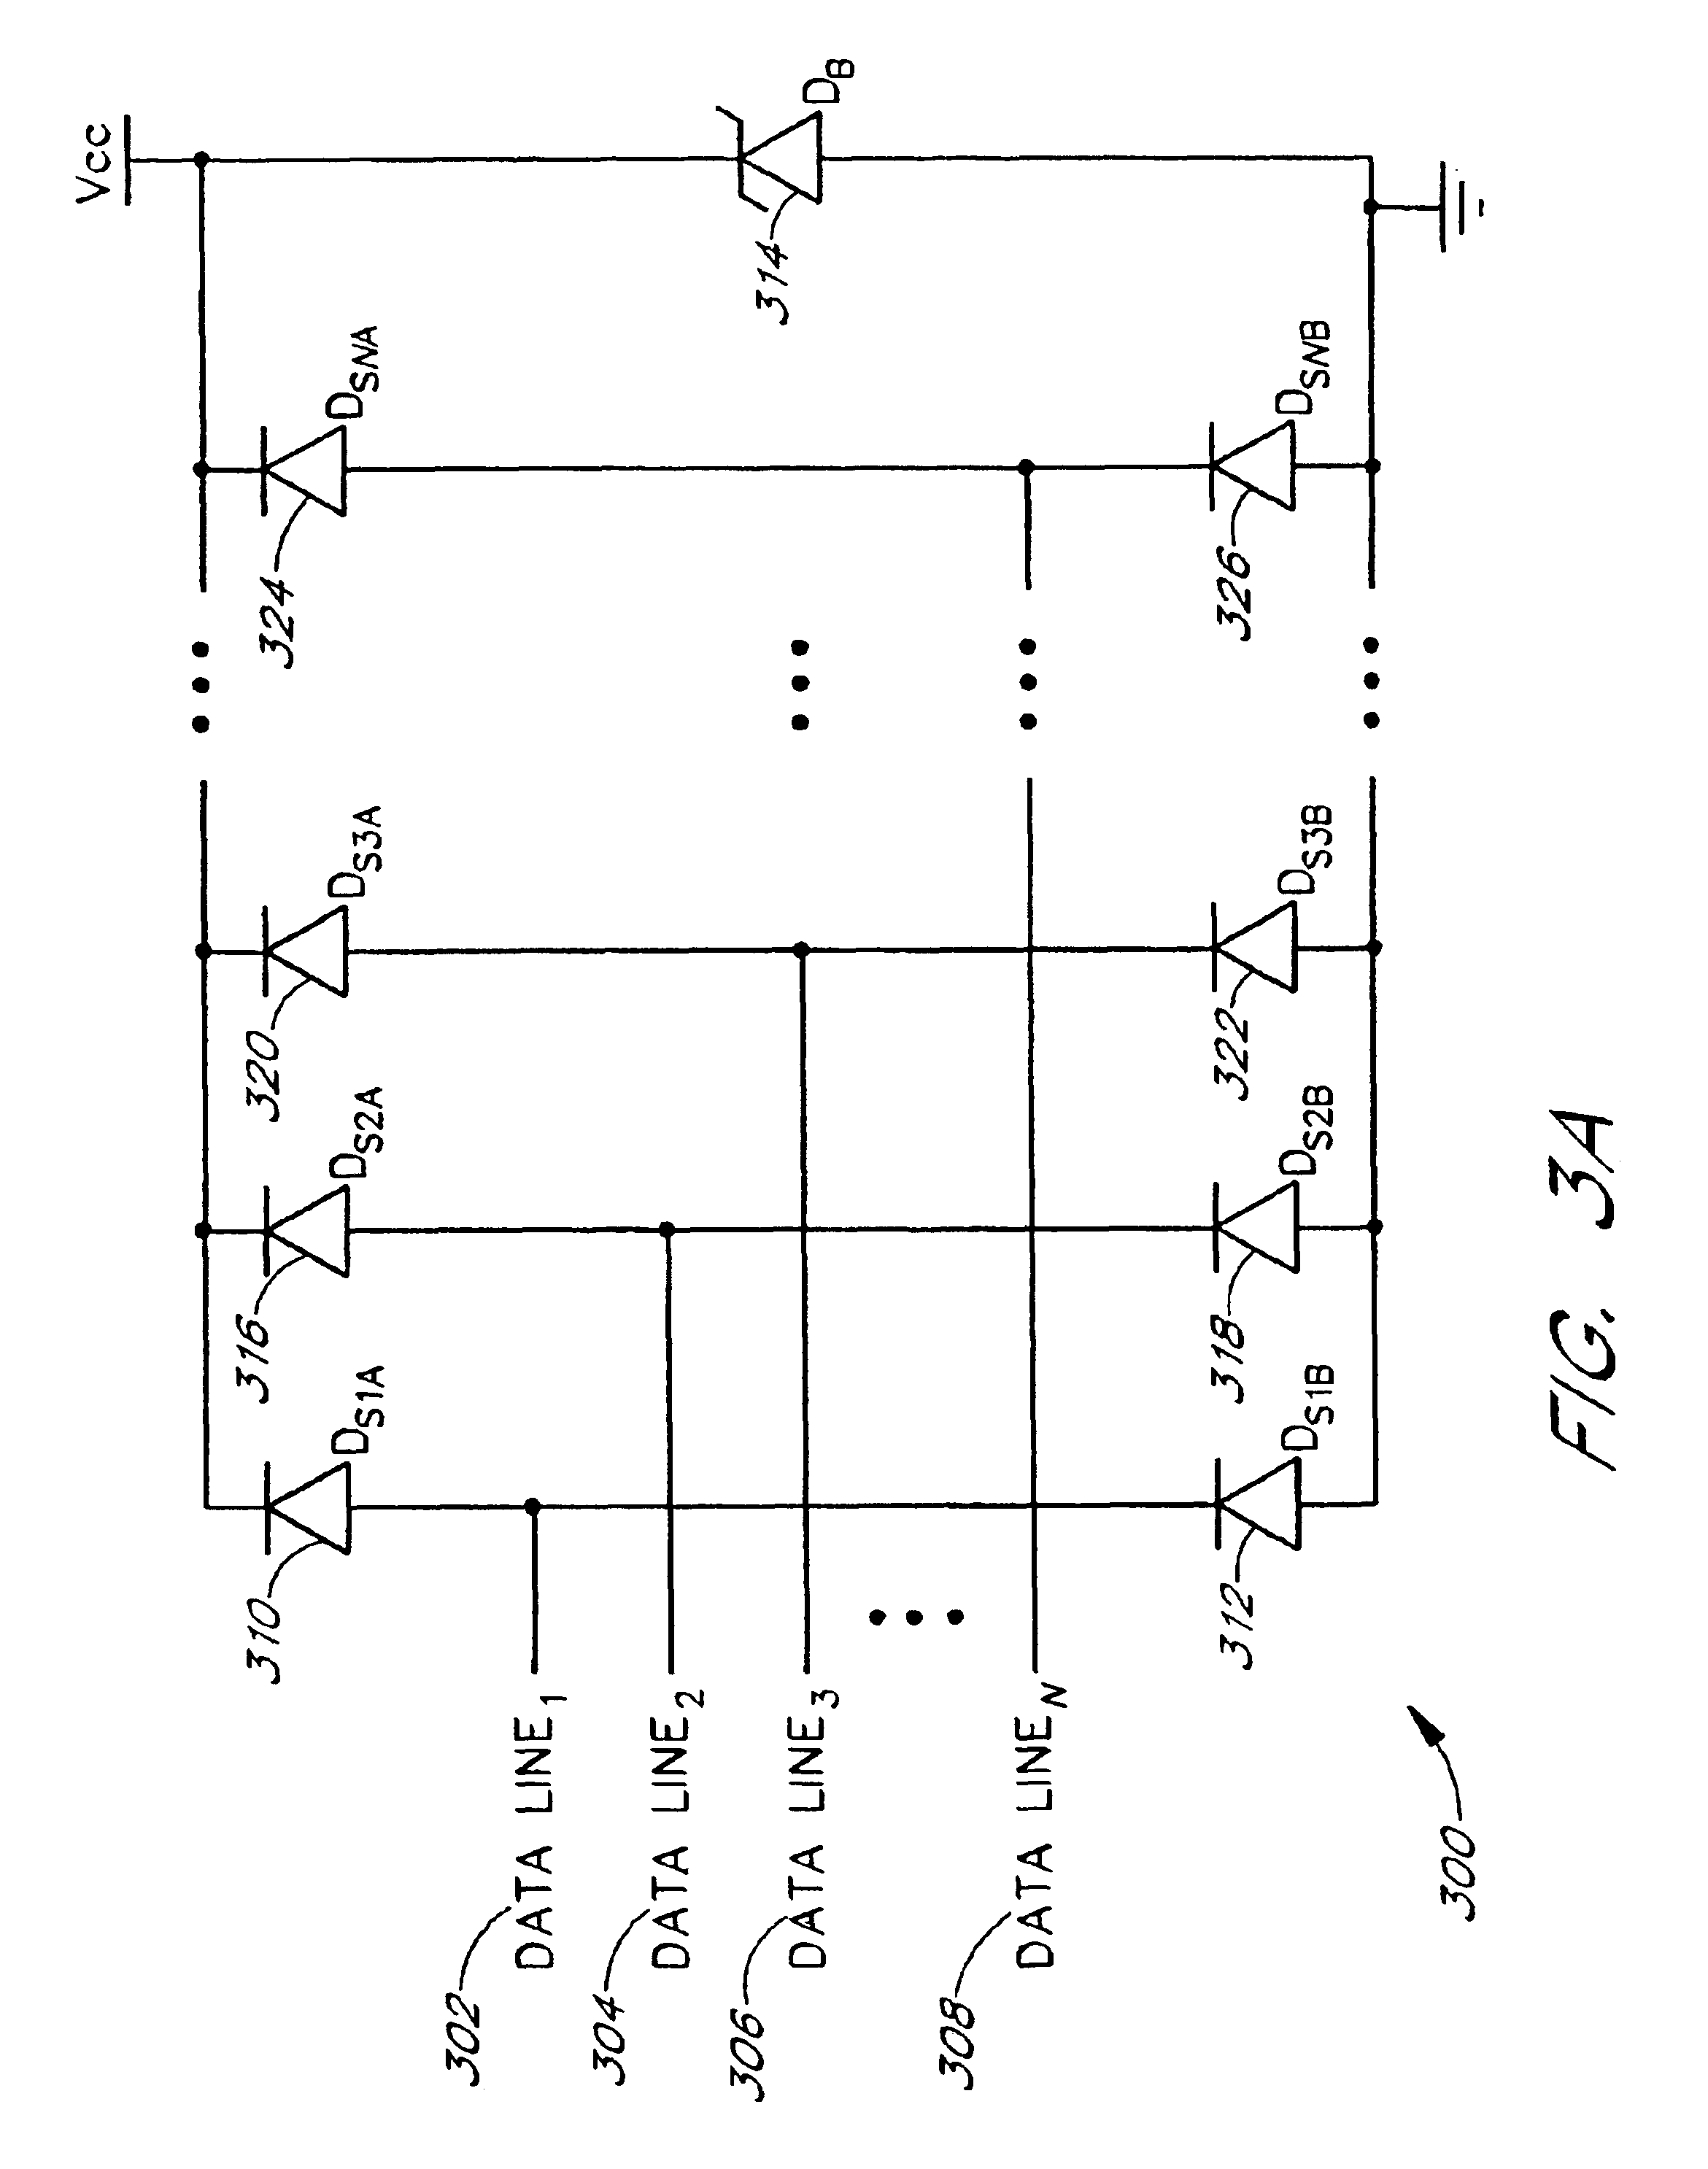 Compound semiconductor protection device for low voltage and high speed data lines